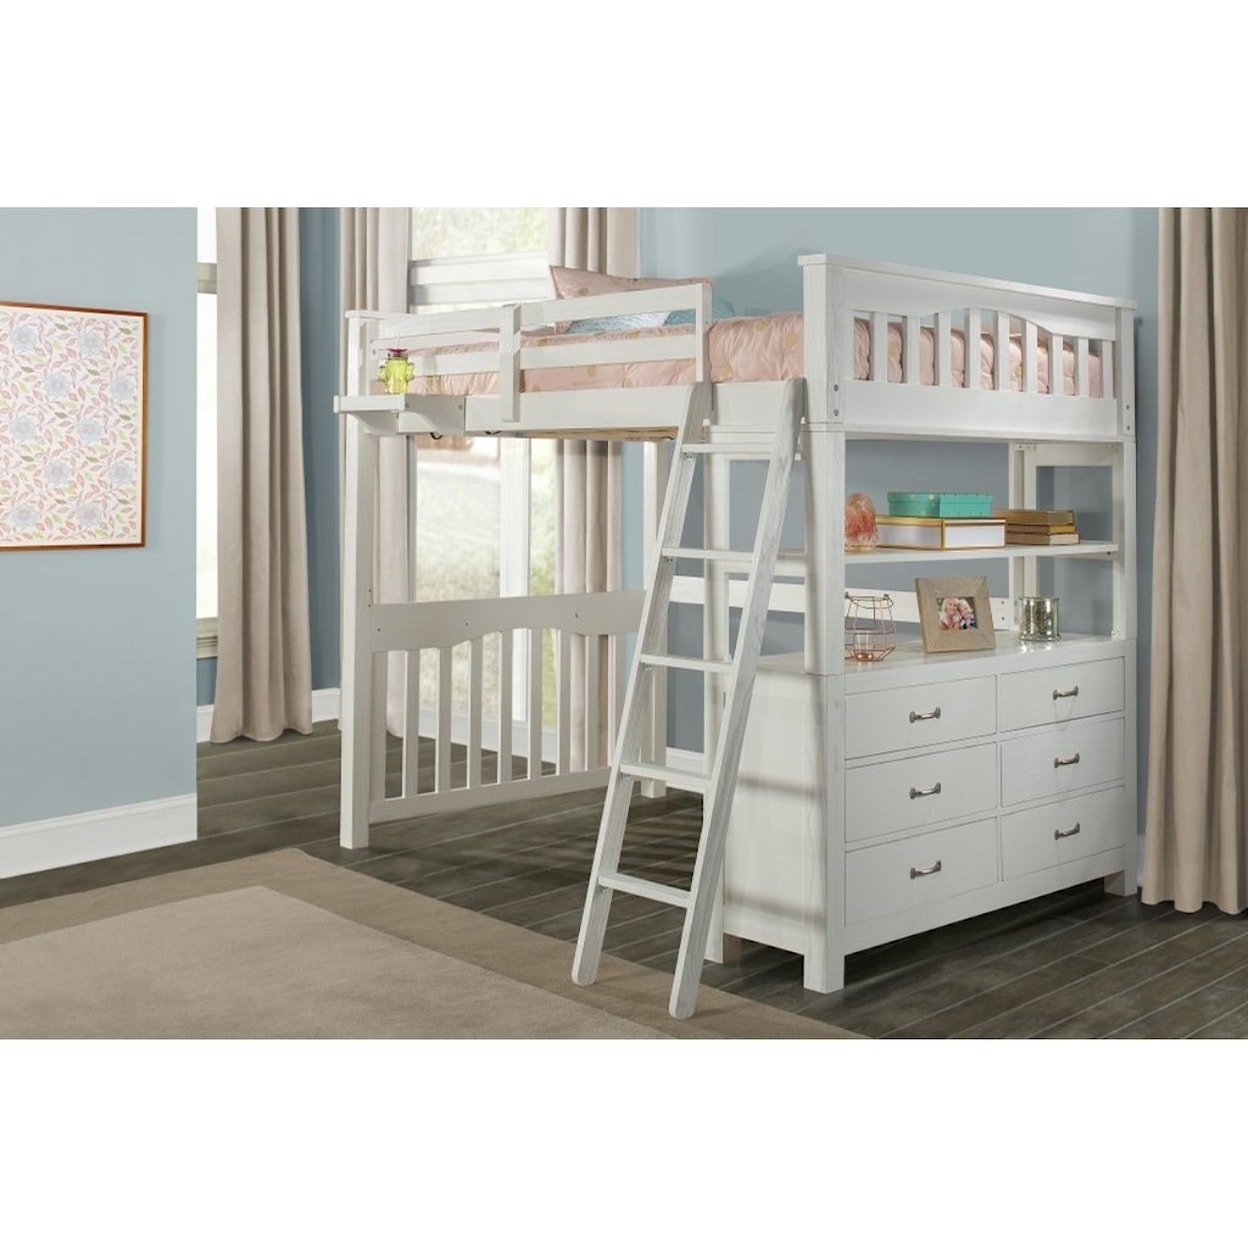 NE Kids Highlands Full Loft Bed with Hanging Tray